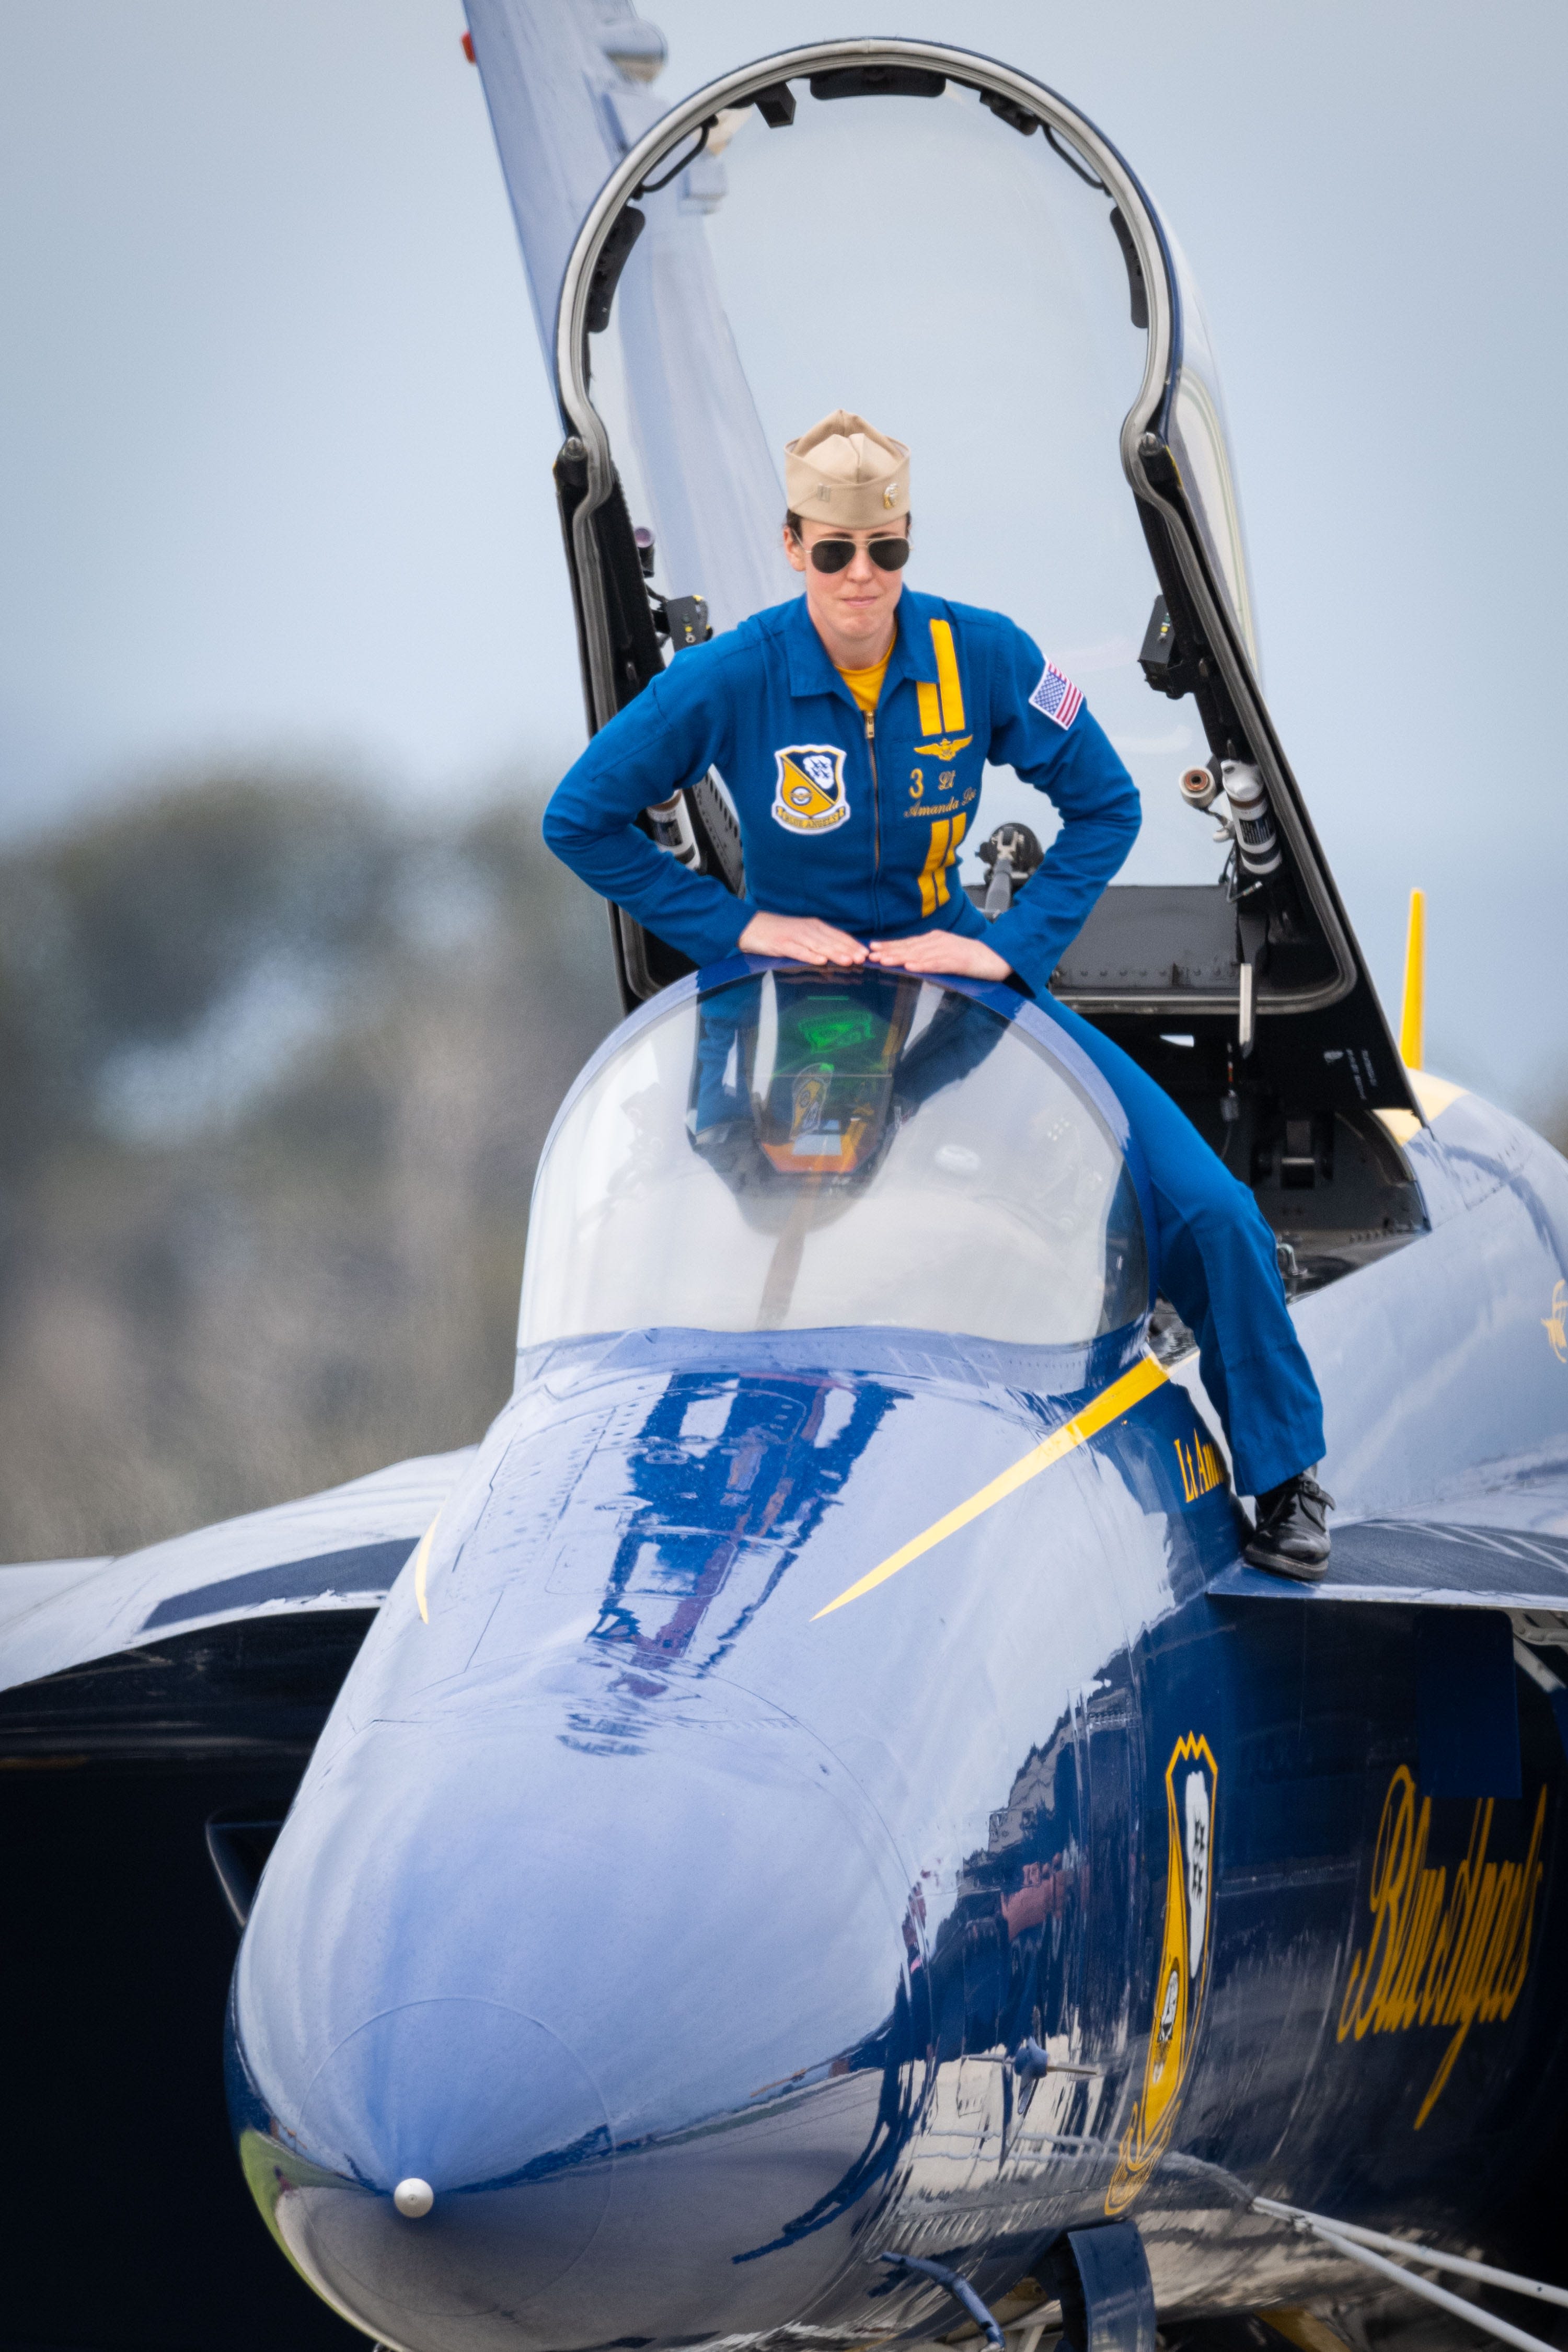 The Blue Angels return to the Terre Haute Air Show for the first time since 2018